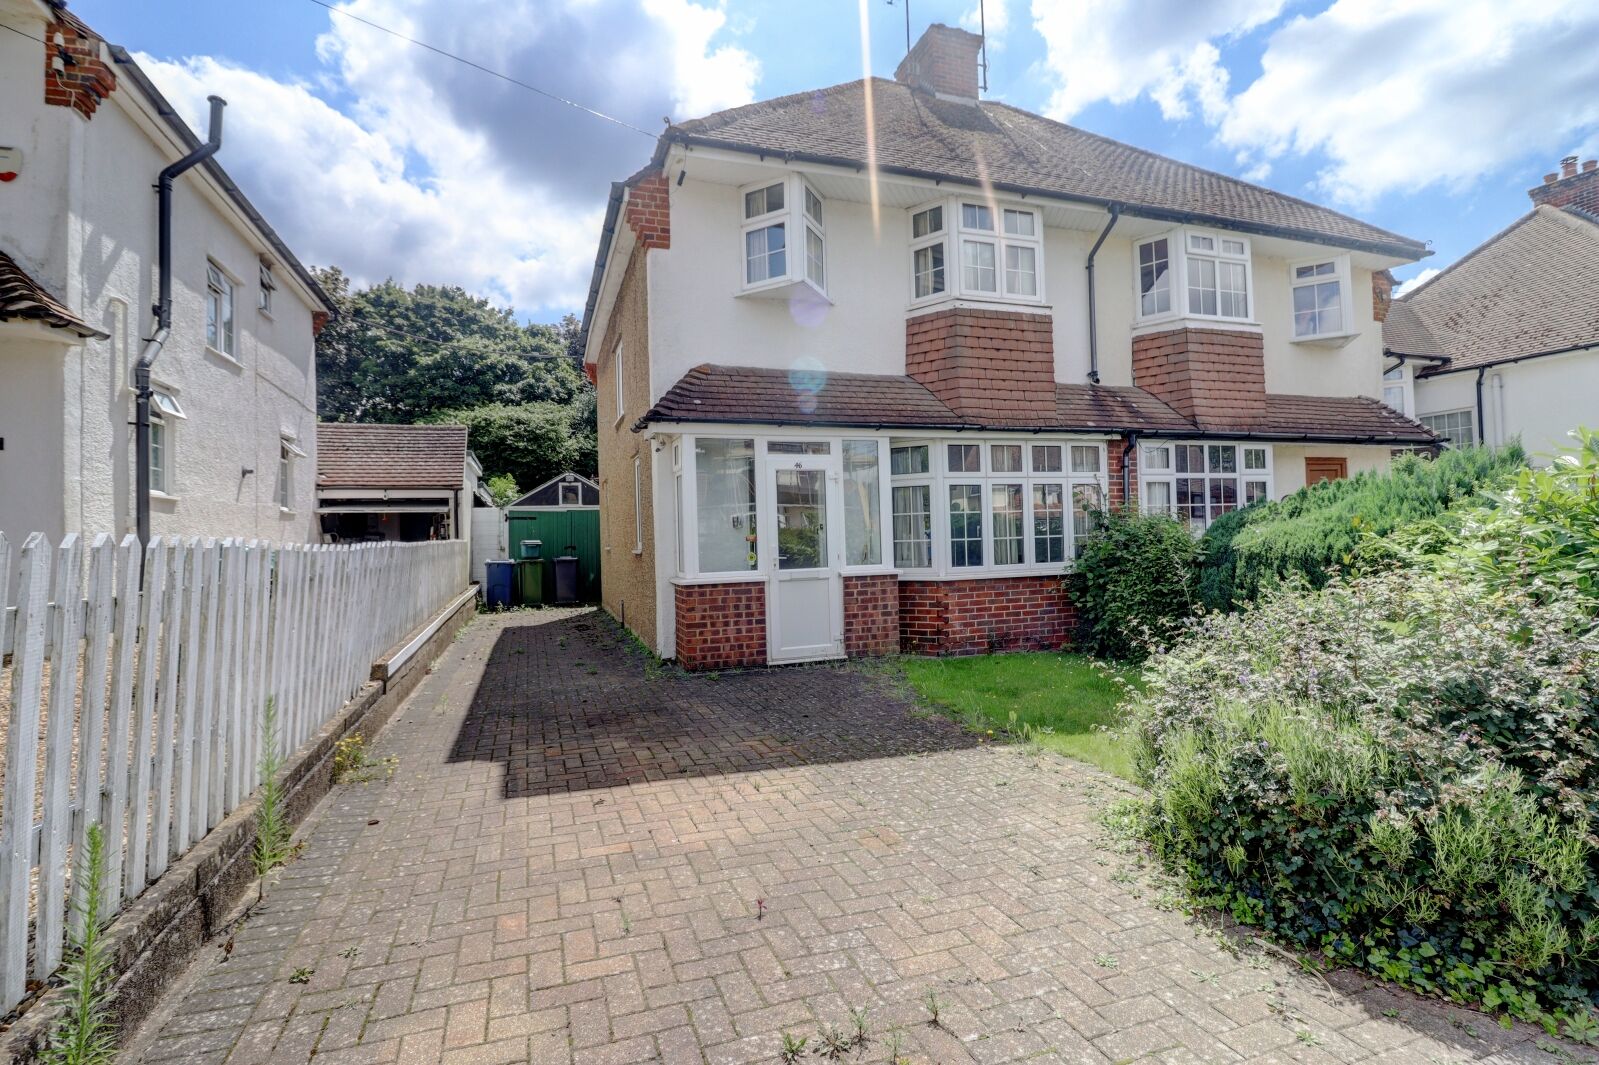 3 bedroom semi detached house for sale Geralds Road, High Wycombe, HP13, main image